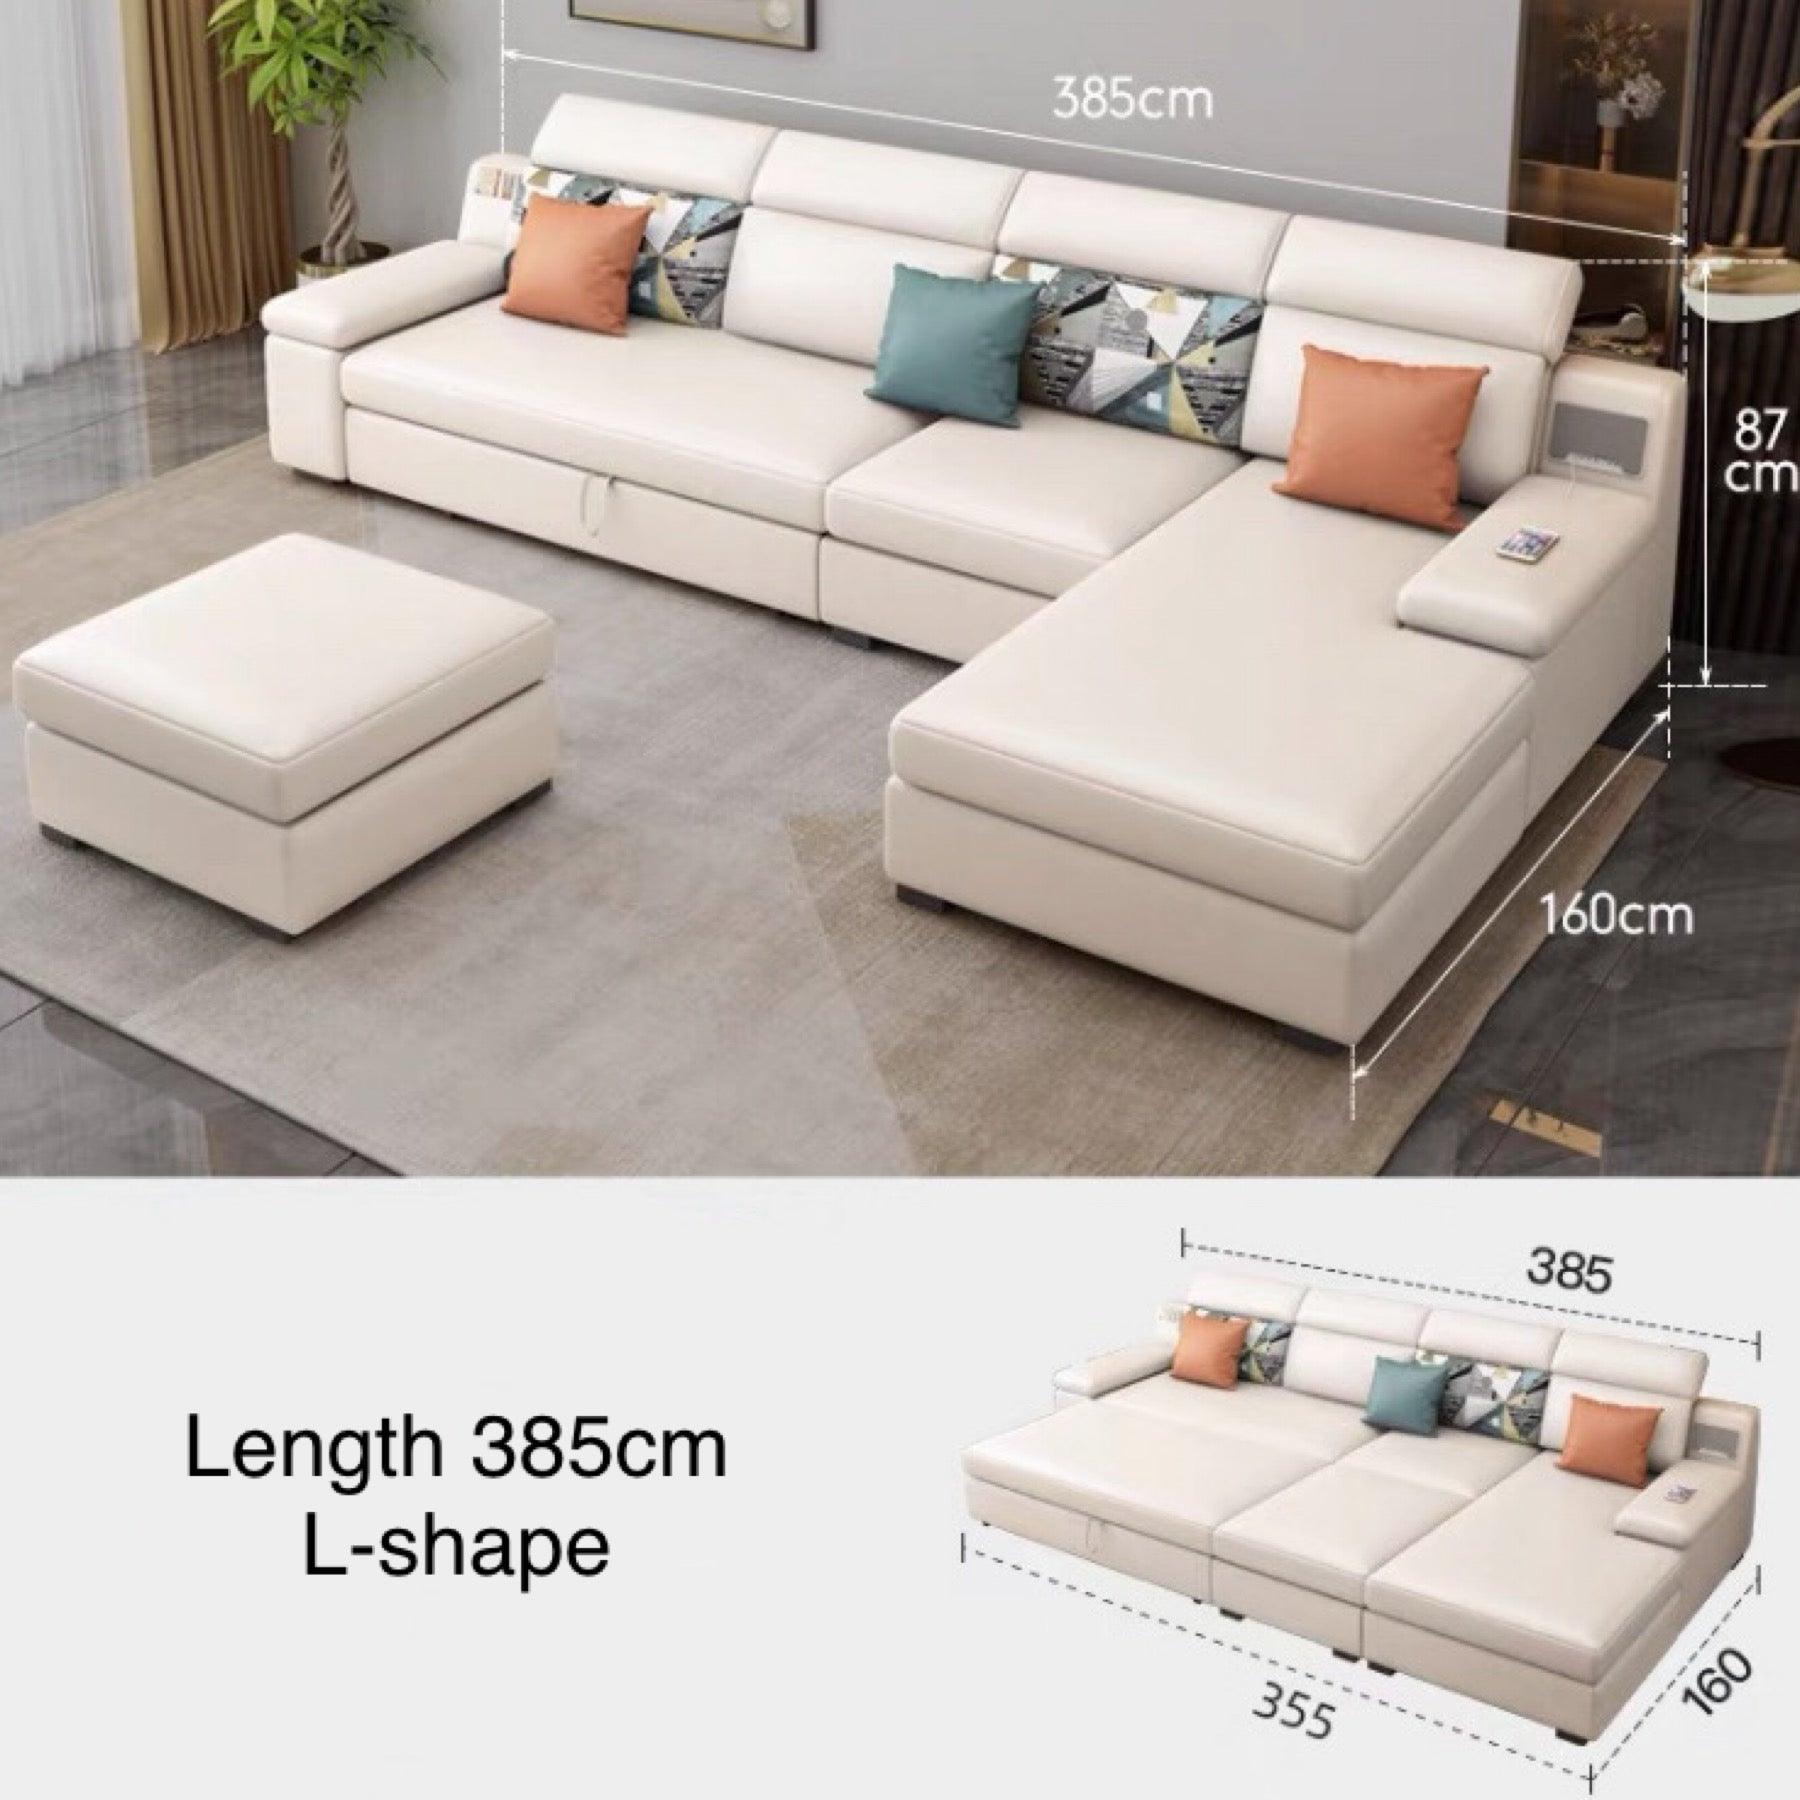 home-atelier-f31a Leather-Aire / Length 385cm/ L-shape / White Allson Sectional Sofa Bed